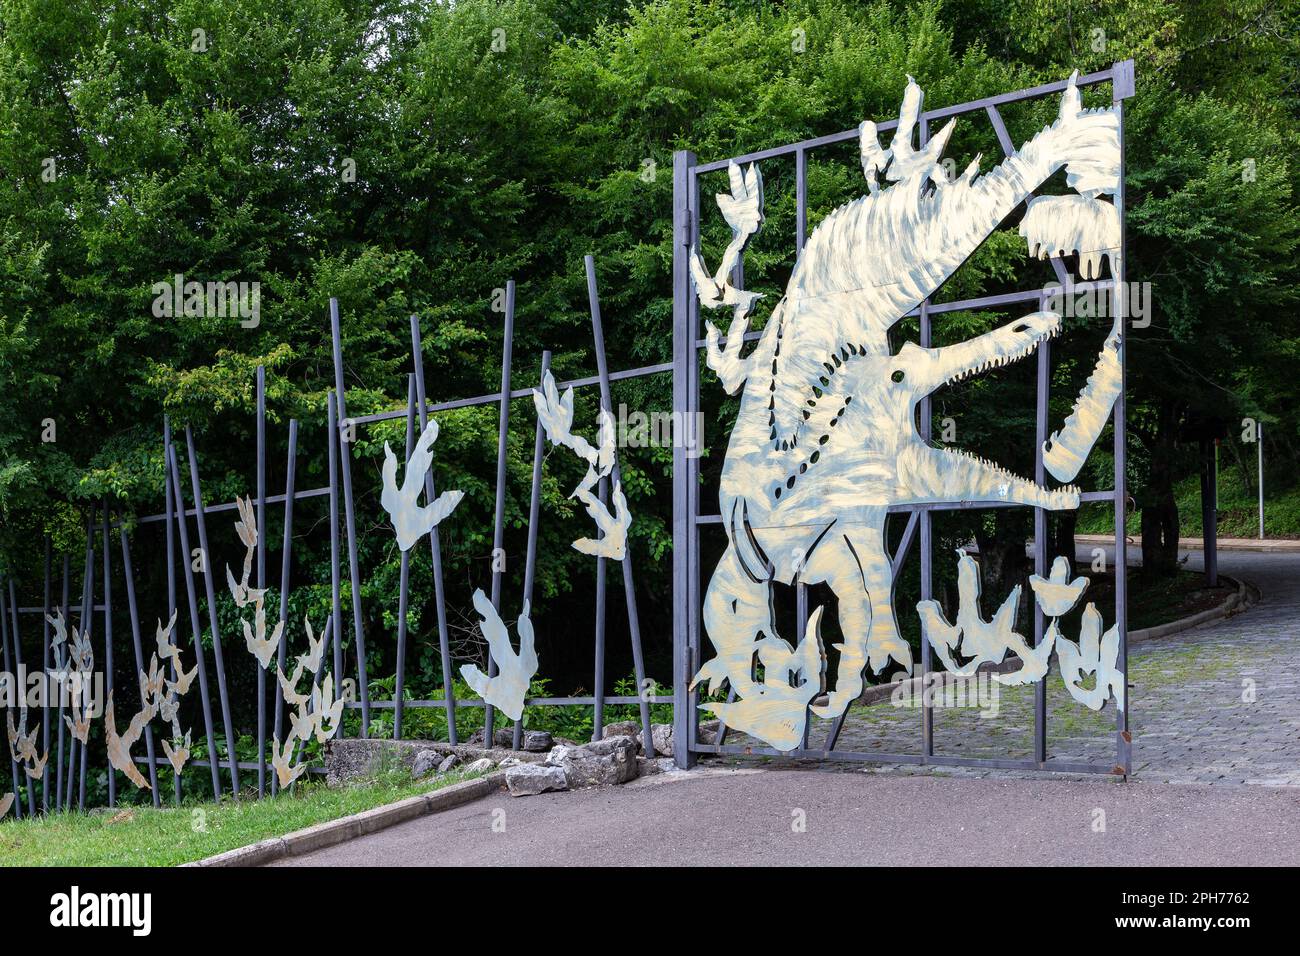 Entrance to Sataplia Strict Nature Reserve in Georgia, metal entry gate to the natural park with dinosaur shapes. Stock Photo